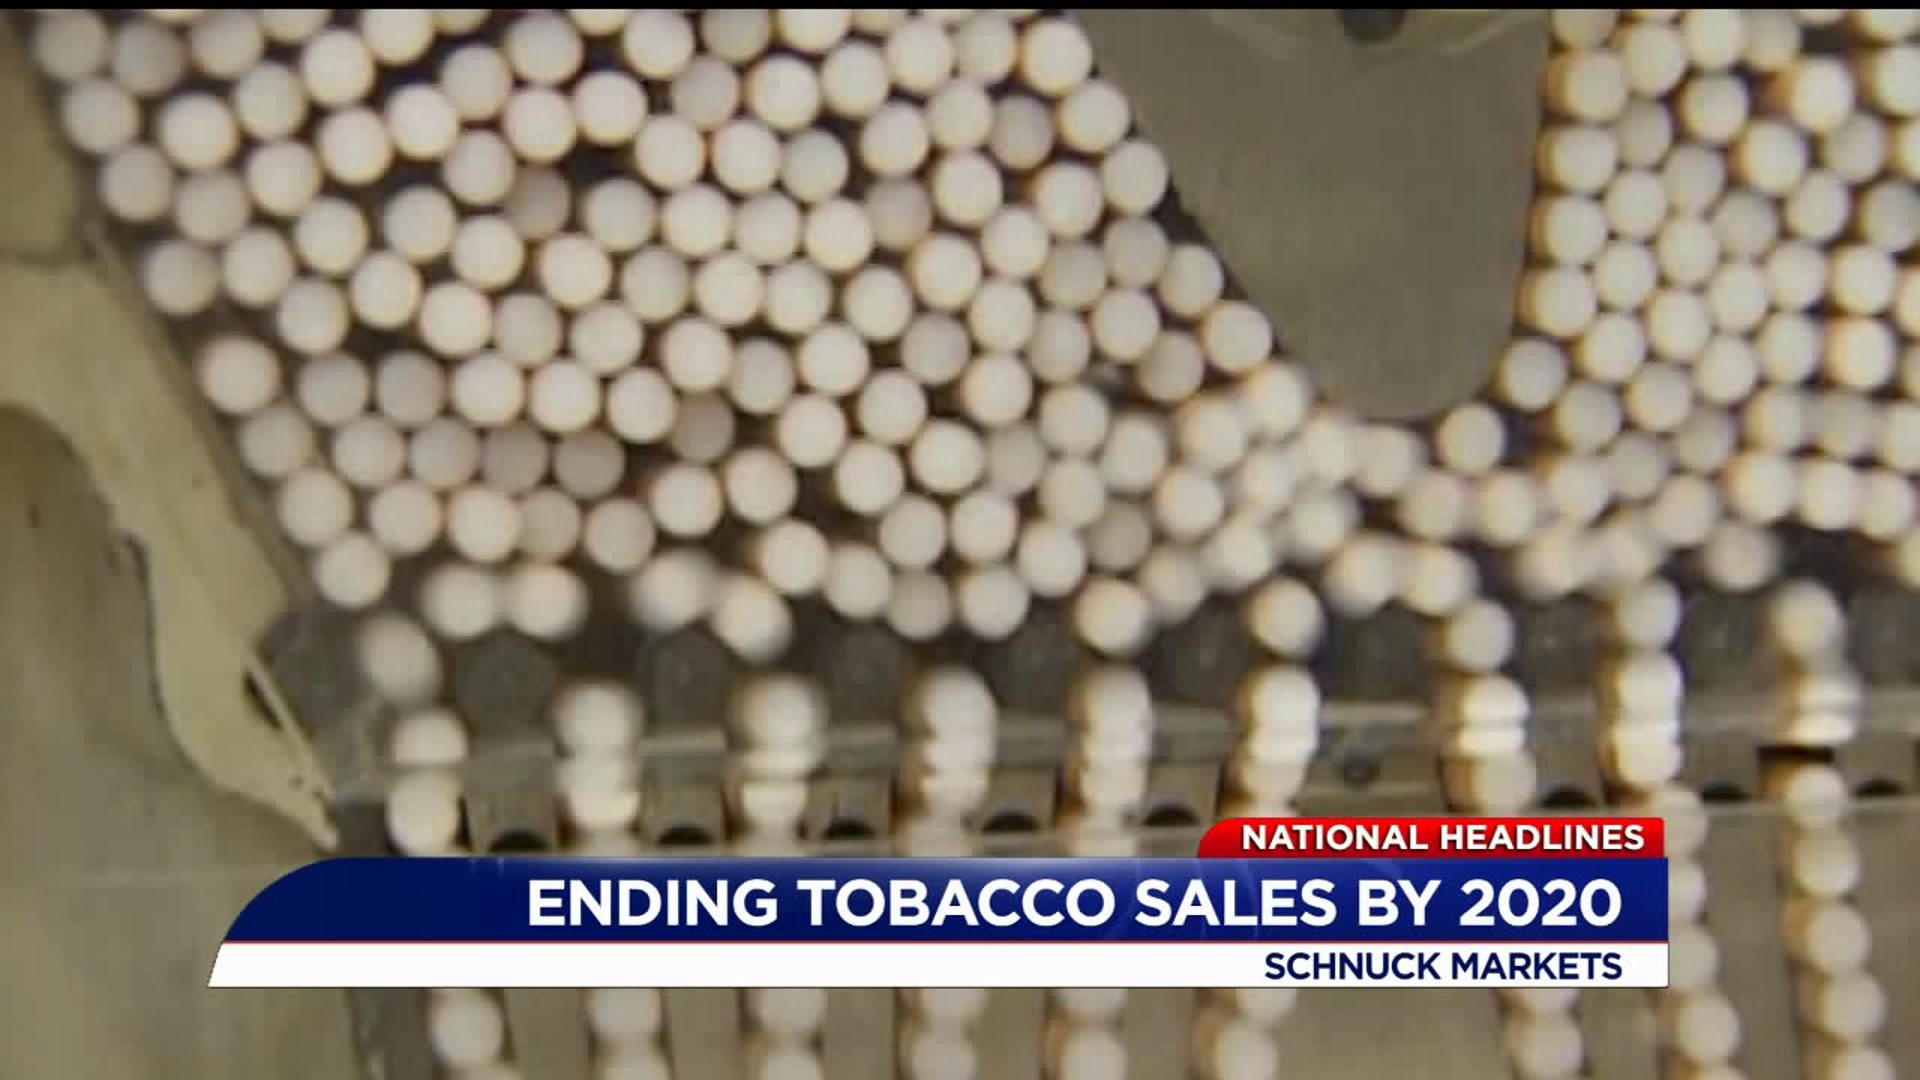 Schnucks will no longer sell ANY tobacco products starting 2020